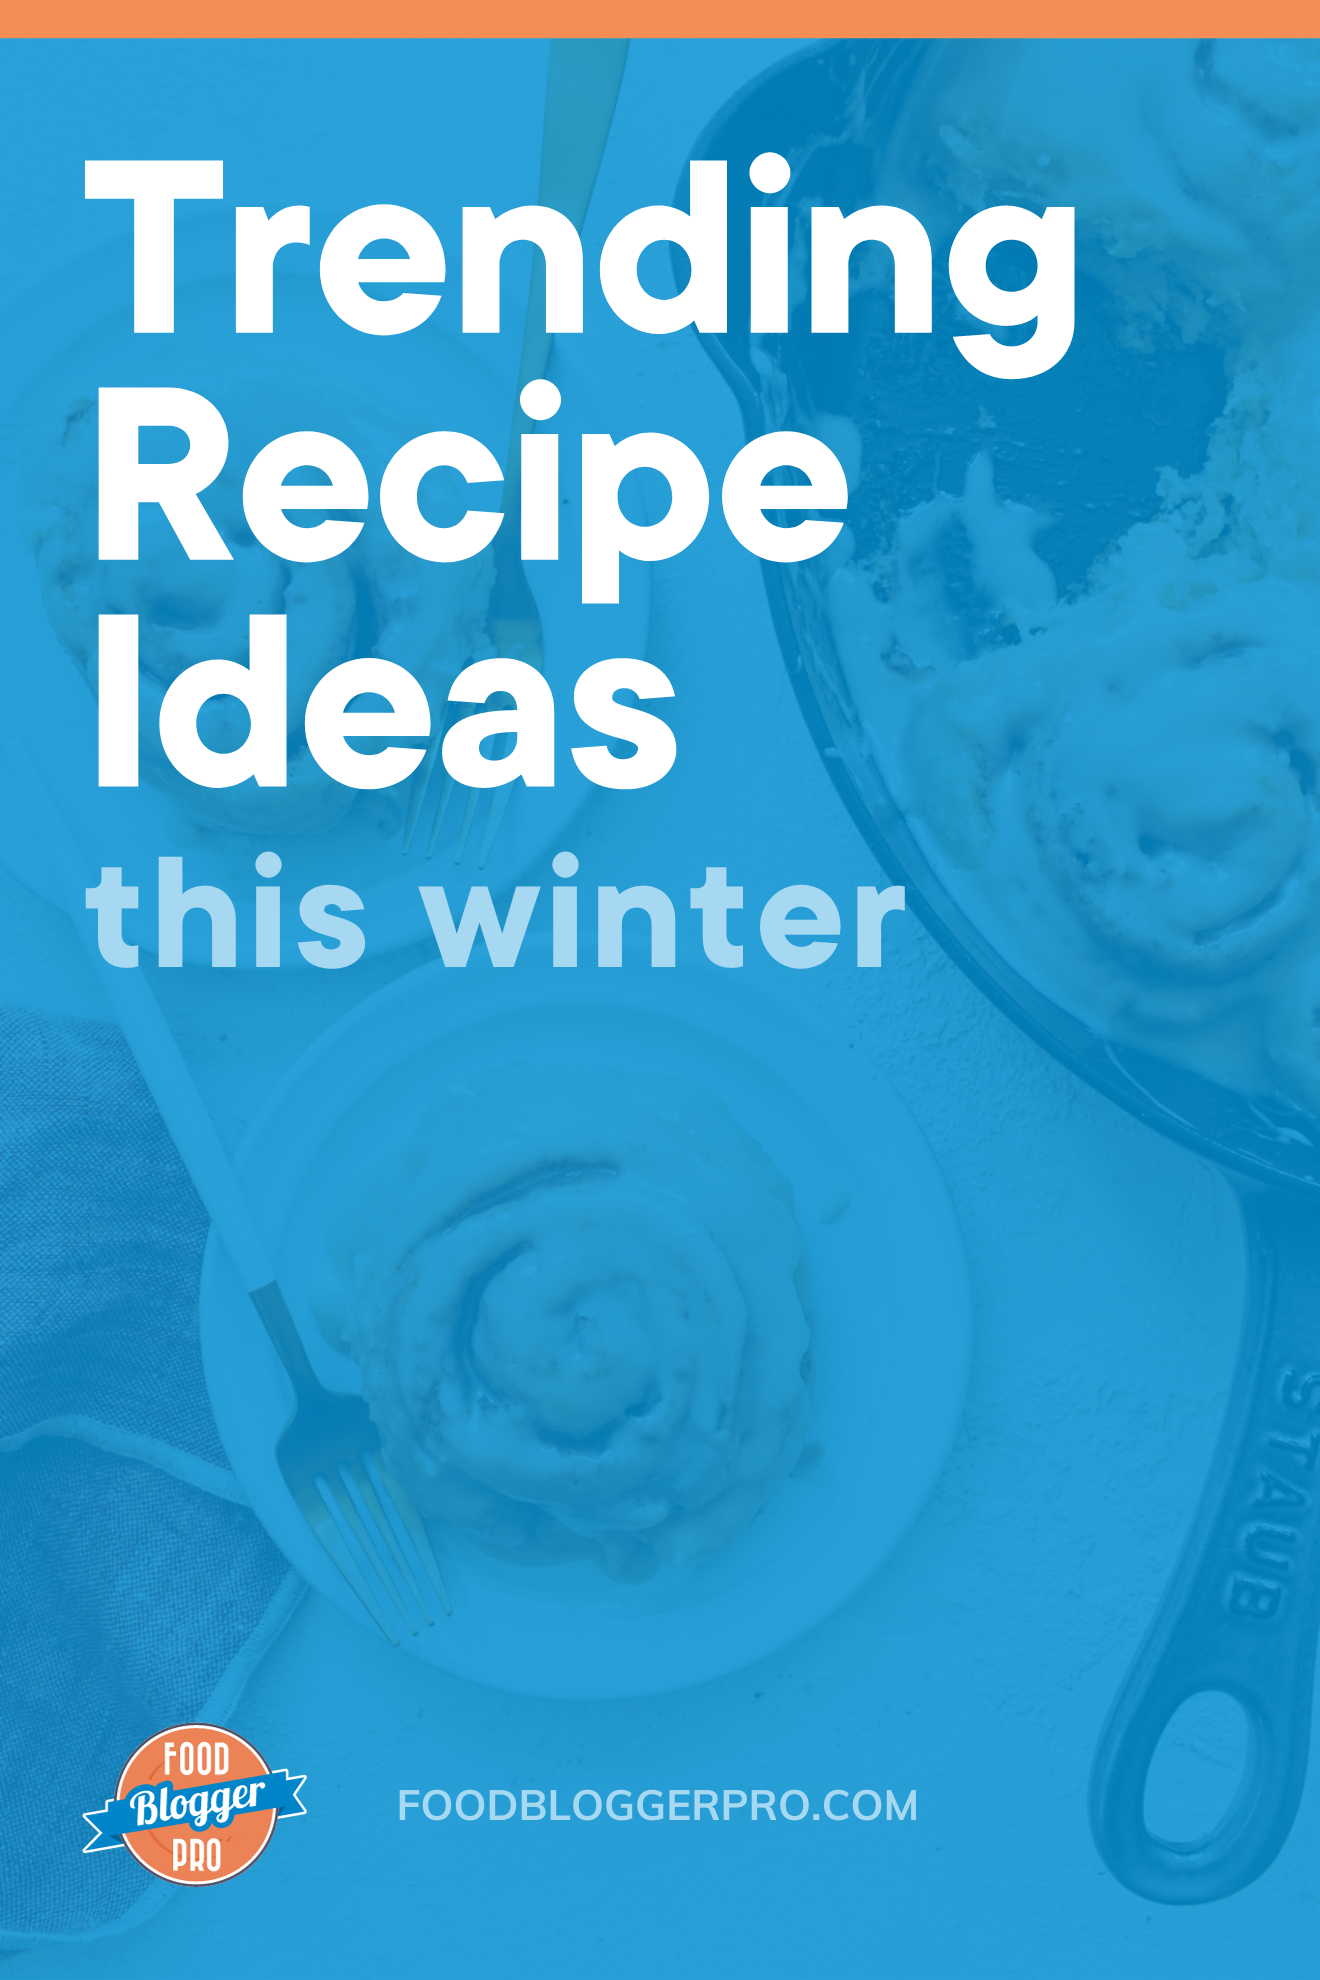 Cinnamon Rolls and the title of this blog post 'Trending Recipe Ideas this Winter'